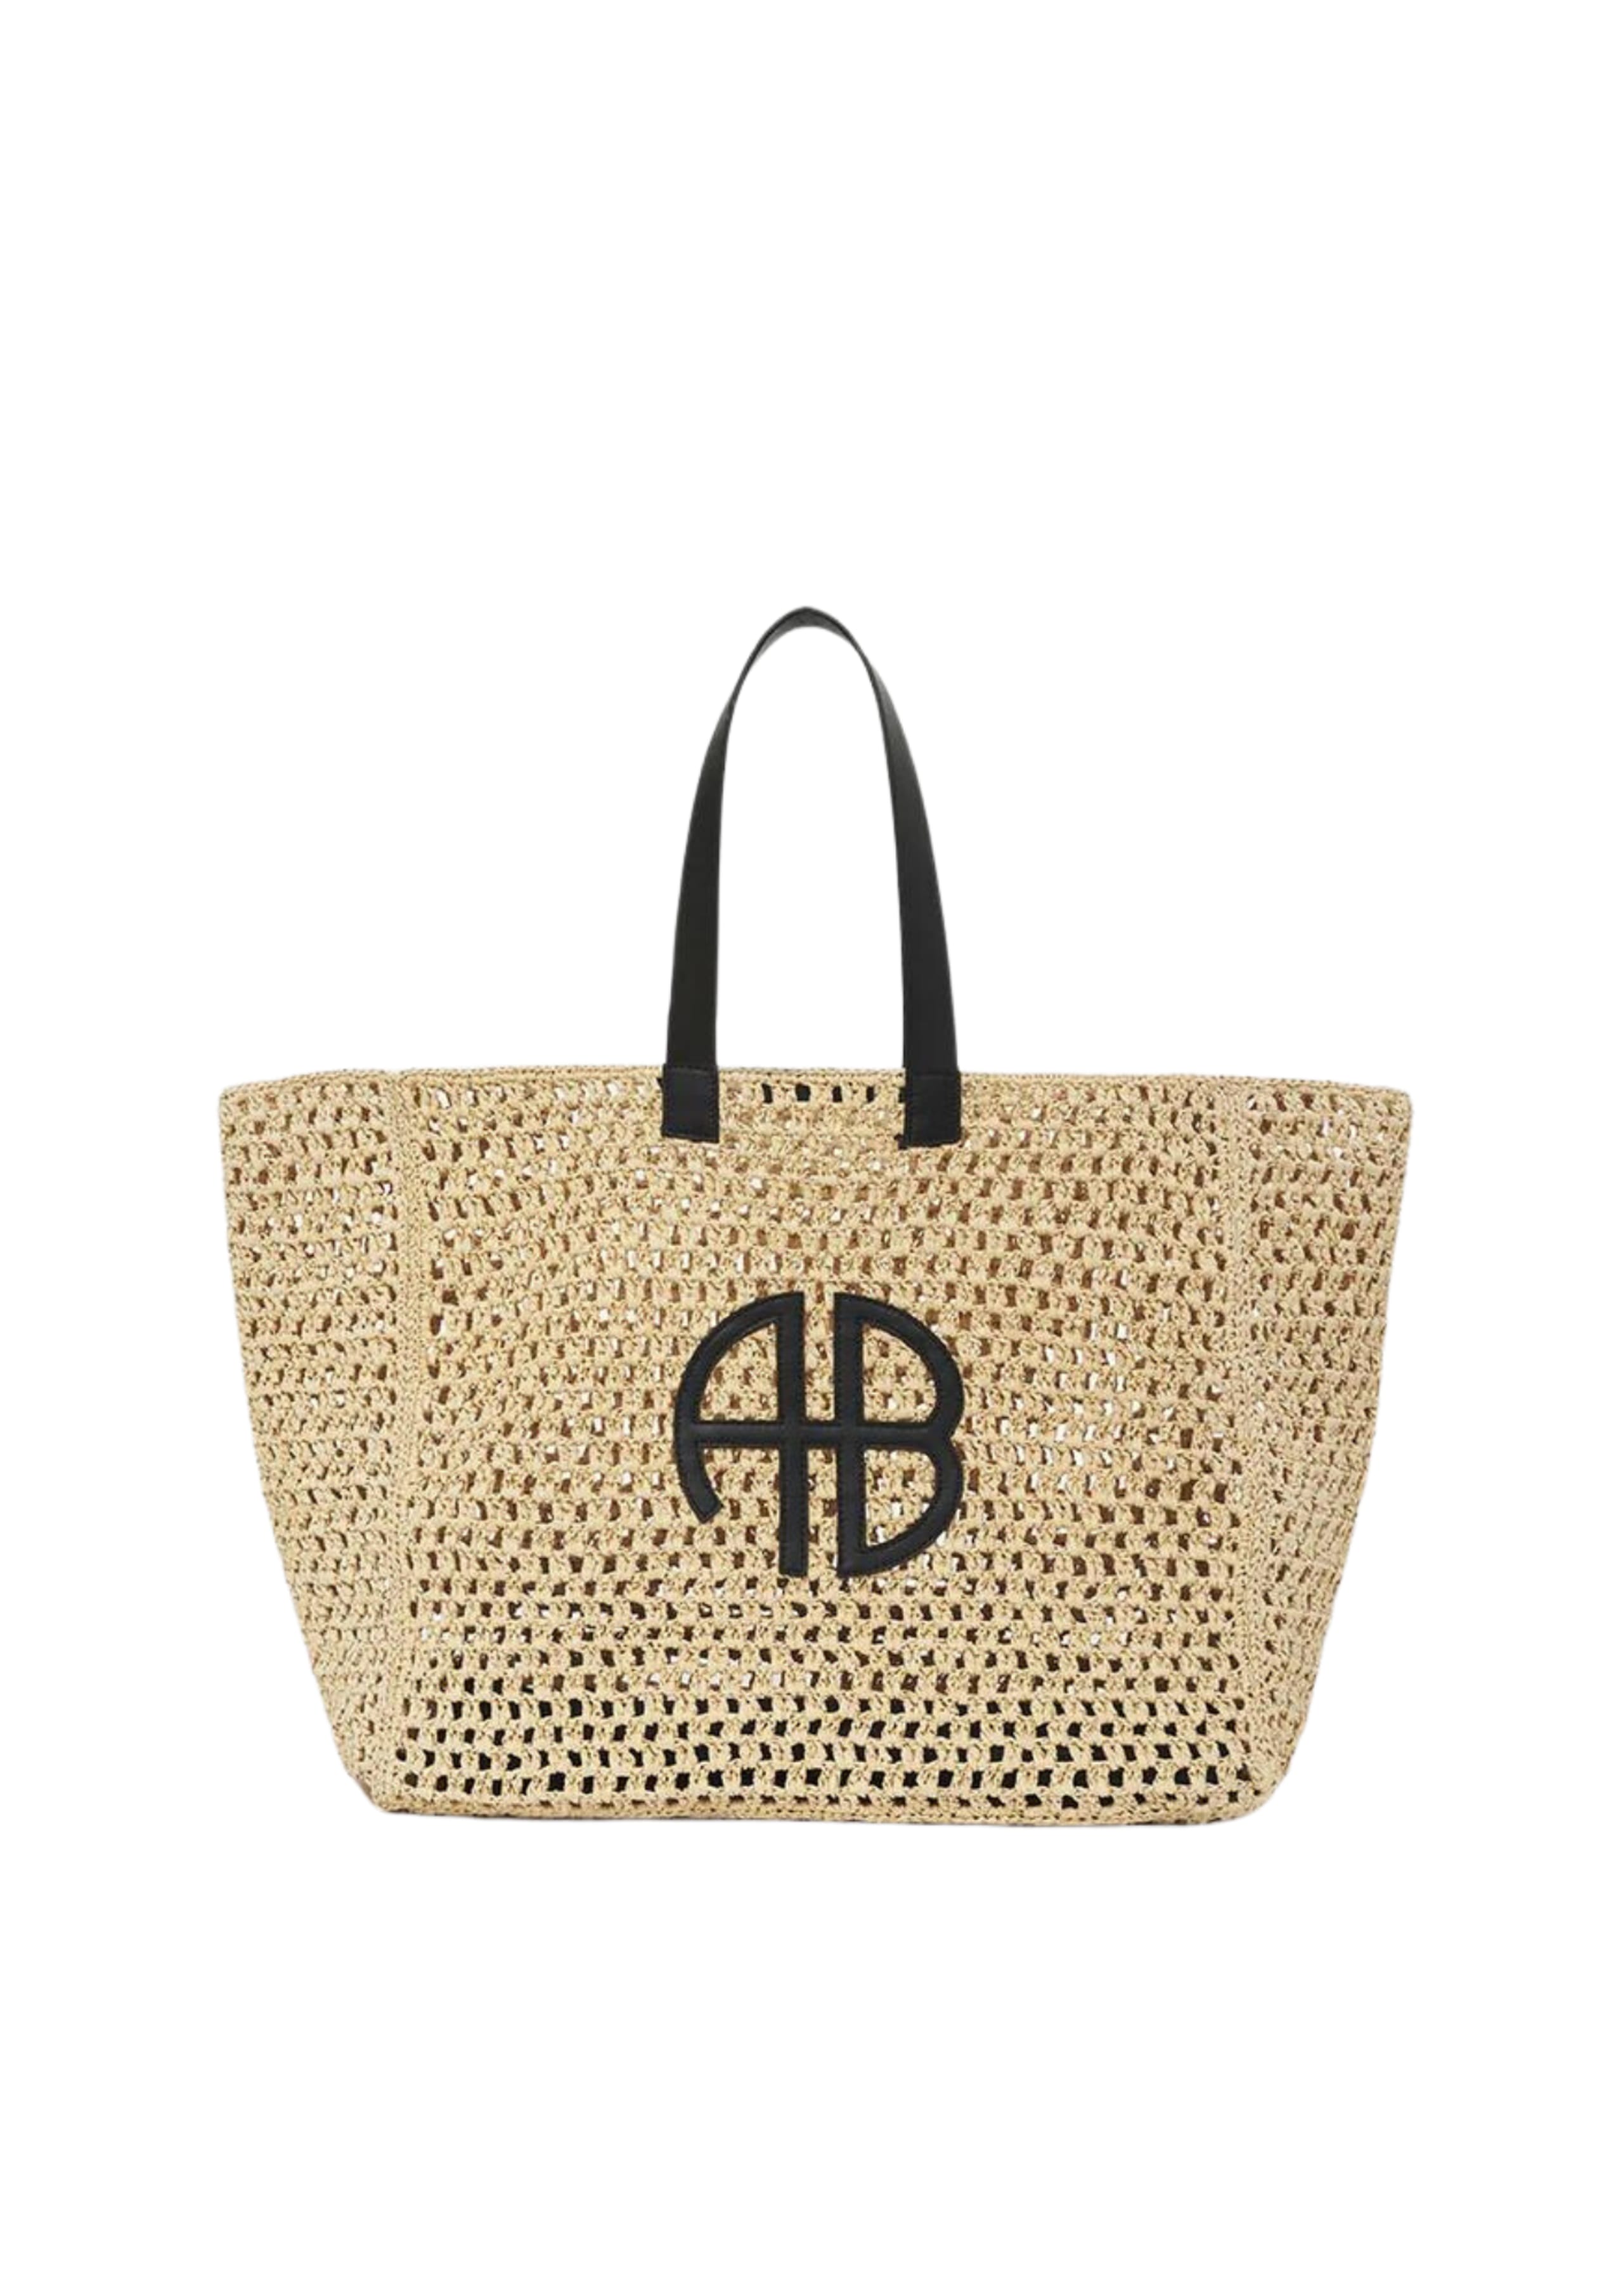 Anine Bing - Tasche - Large Rio Tote - Natural